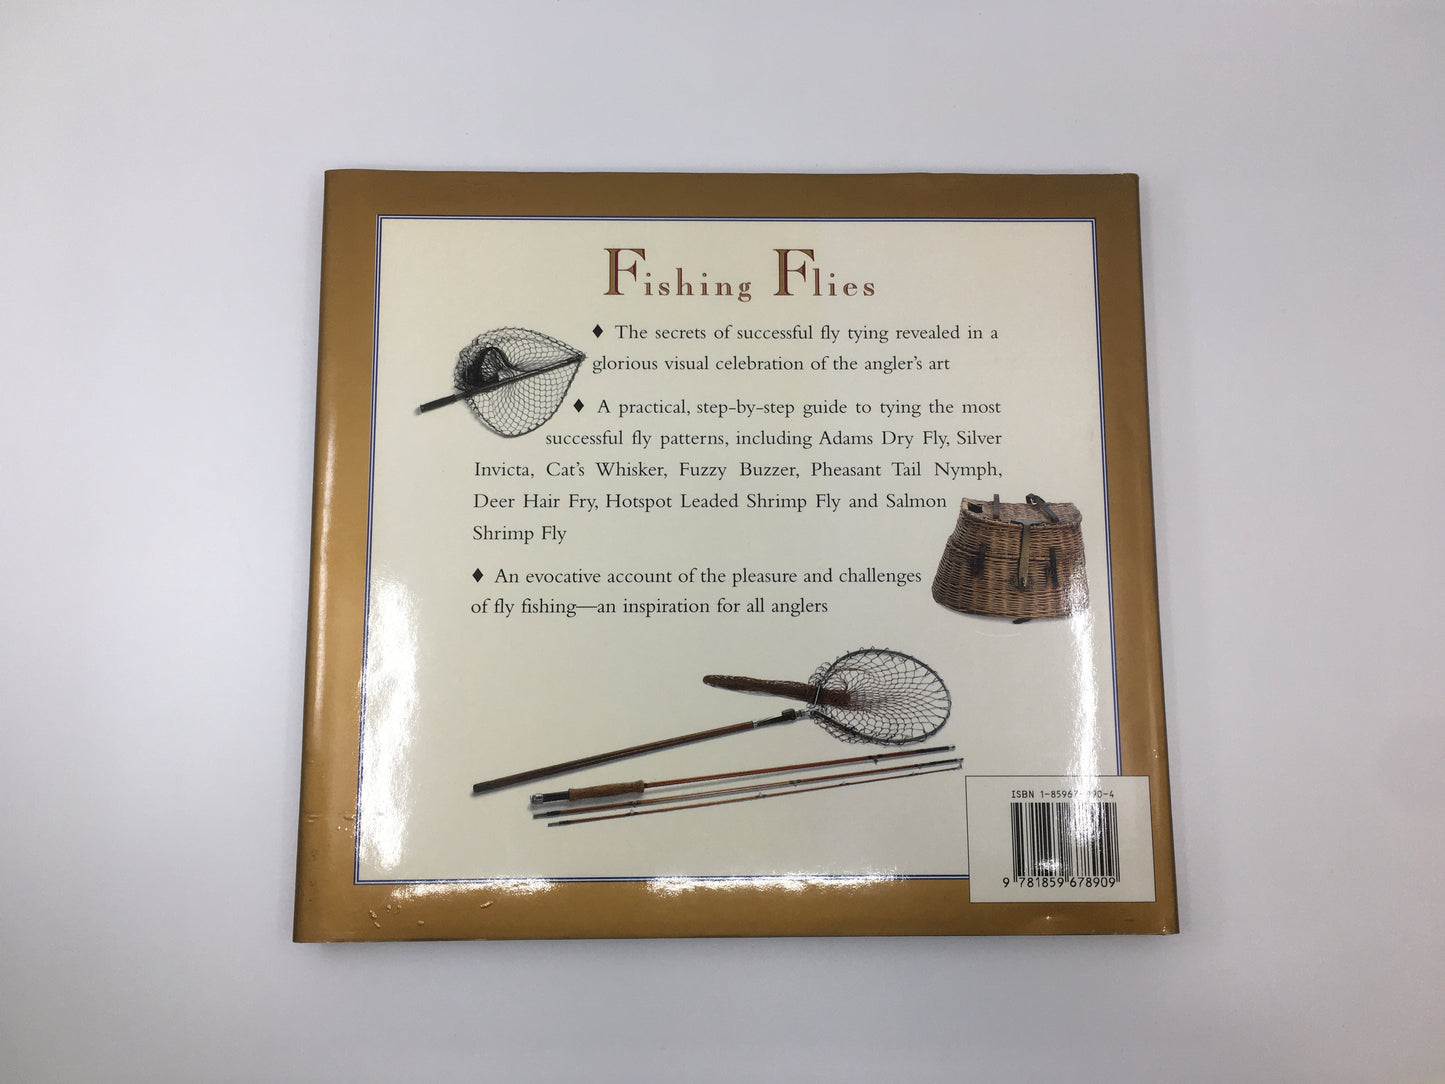 Fishing Flies: A Practical Guide to the Art of Fly Tying